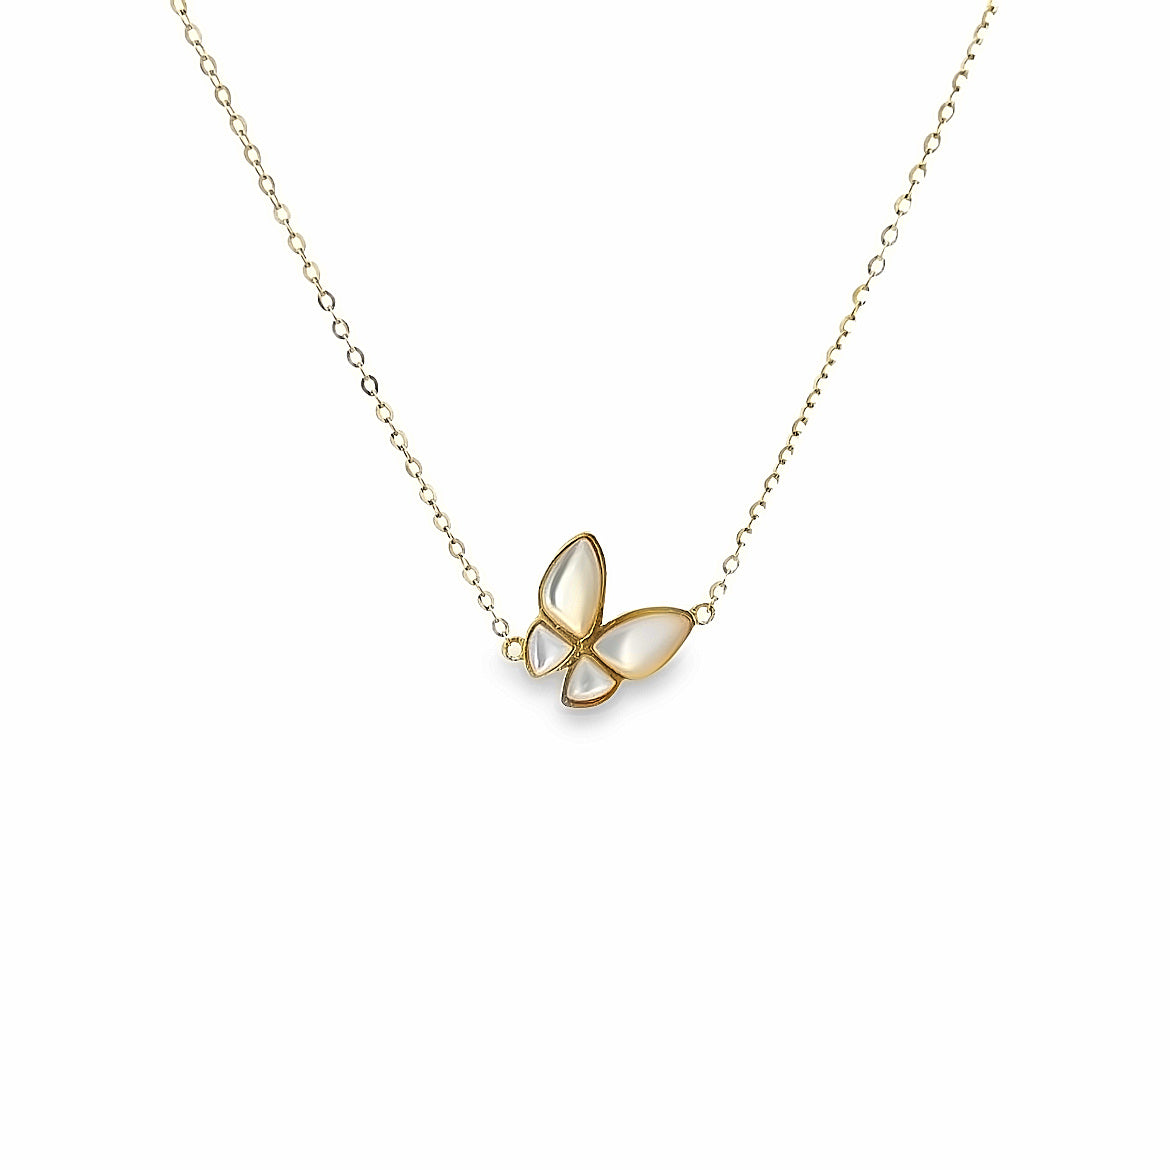 18K GOLD MOTHER OF PEARL BUTTERFLY NECKLACE